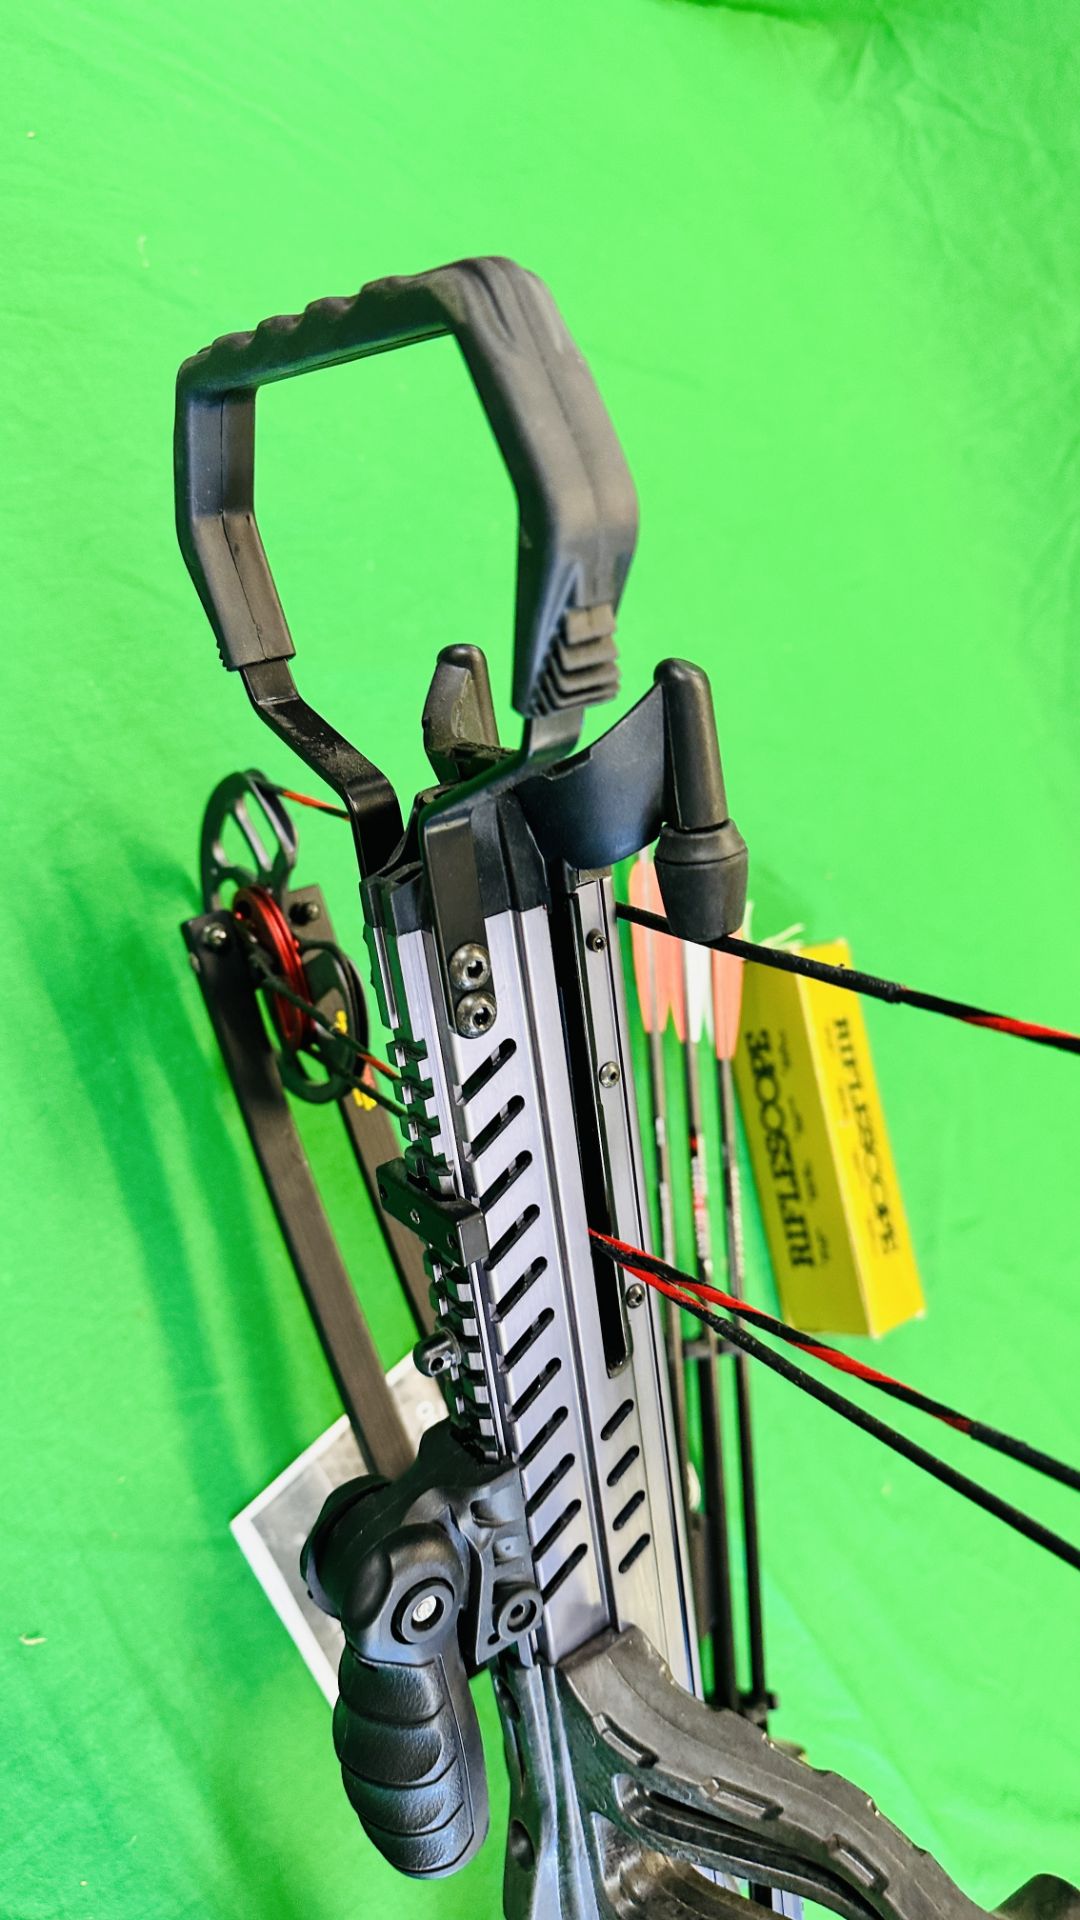 BARNETT "VENGANCE" COMPOUND CROSSBOW COMPLETE WITH THREE CARBON FIBRE CROSSBOW BOLTS, QUIVER, - Image 33 of 35